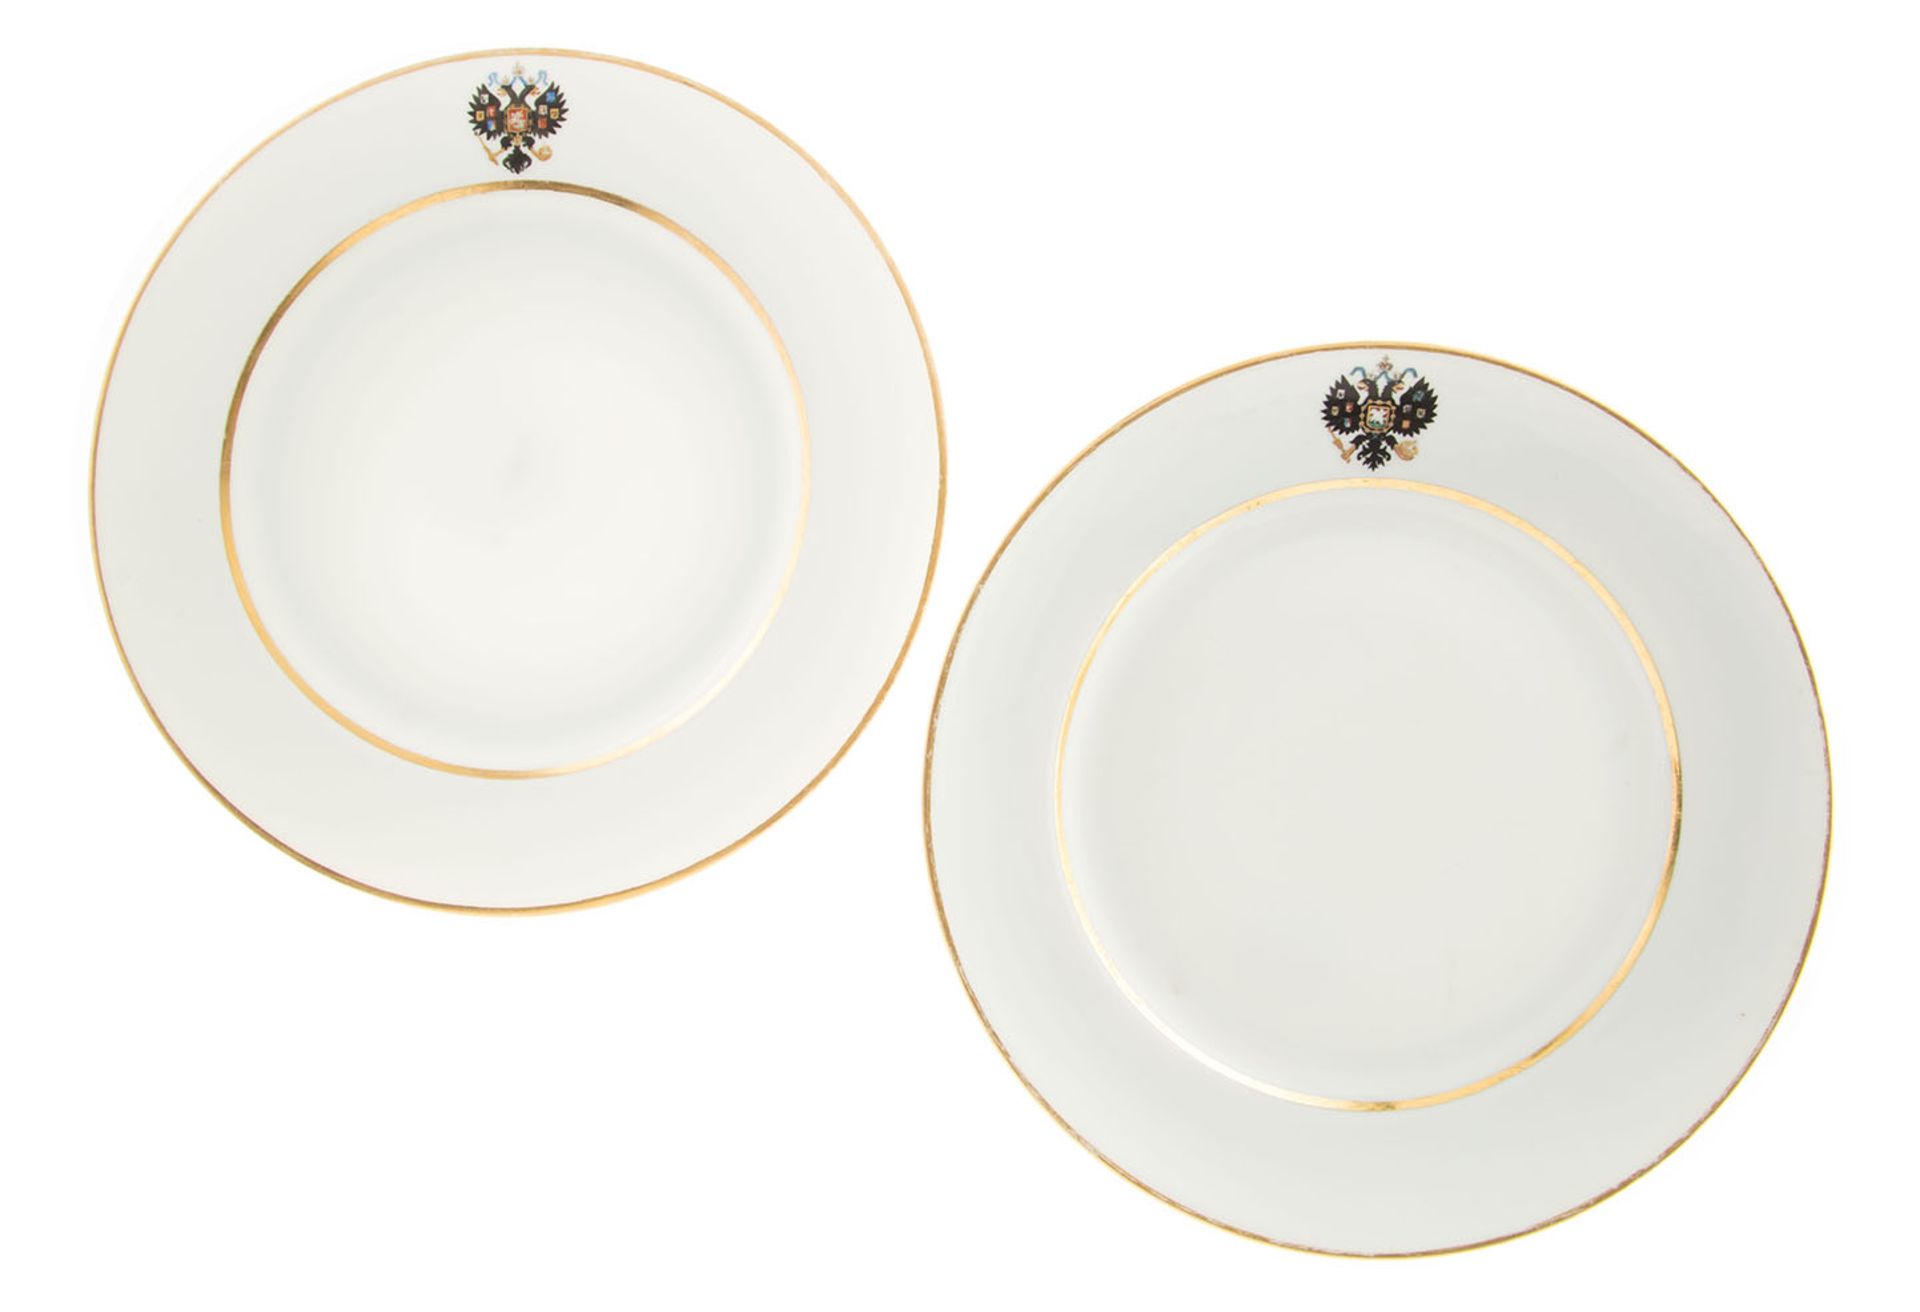 WO PLATES FROM THE ‘SERVICE OF A NEW TYPE WITH RUSSIAN COAT OF ARMS’: CORONATION [...] - Bild 2 aus 4